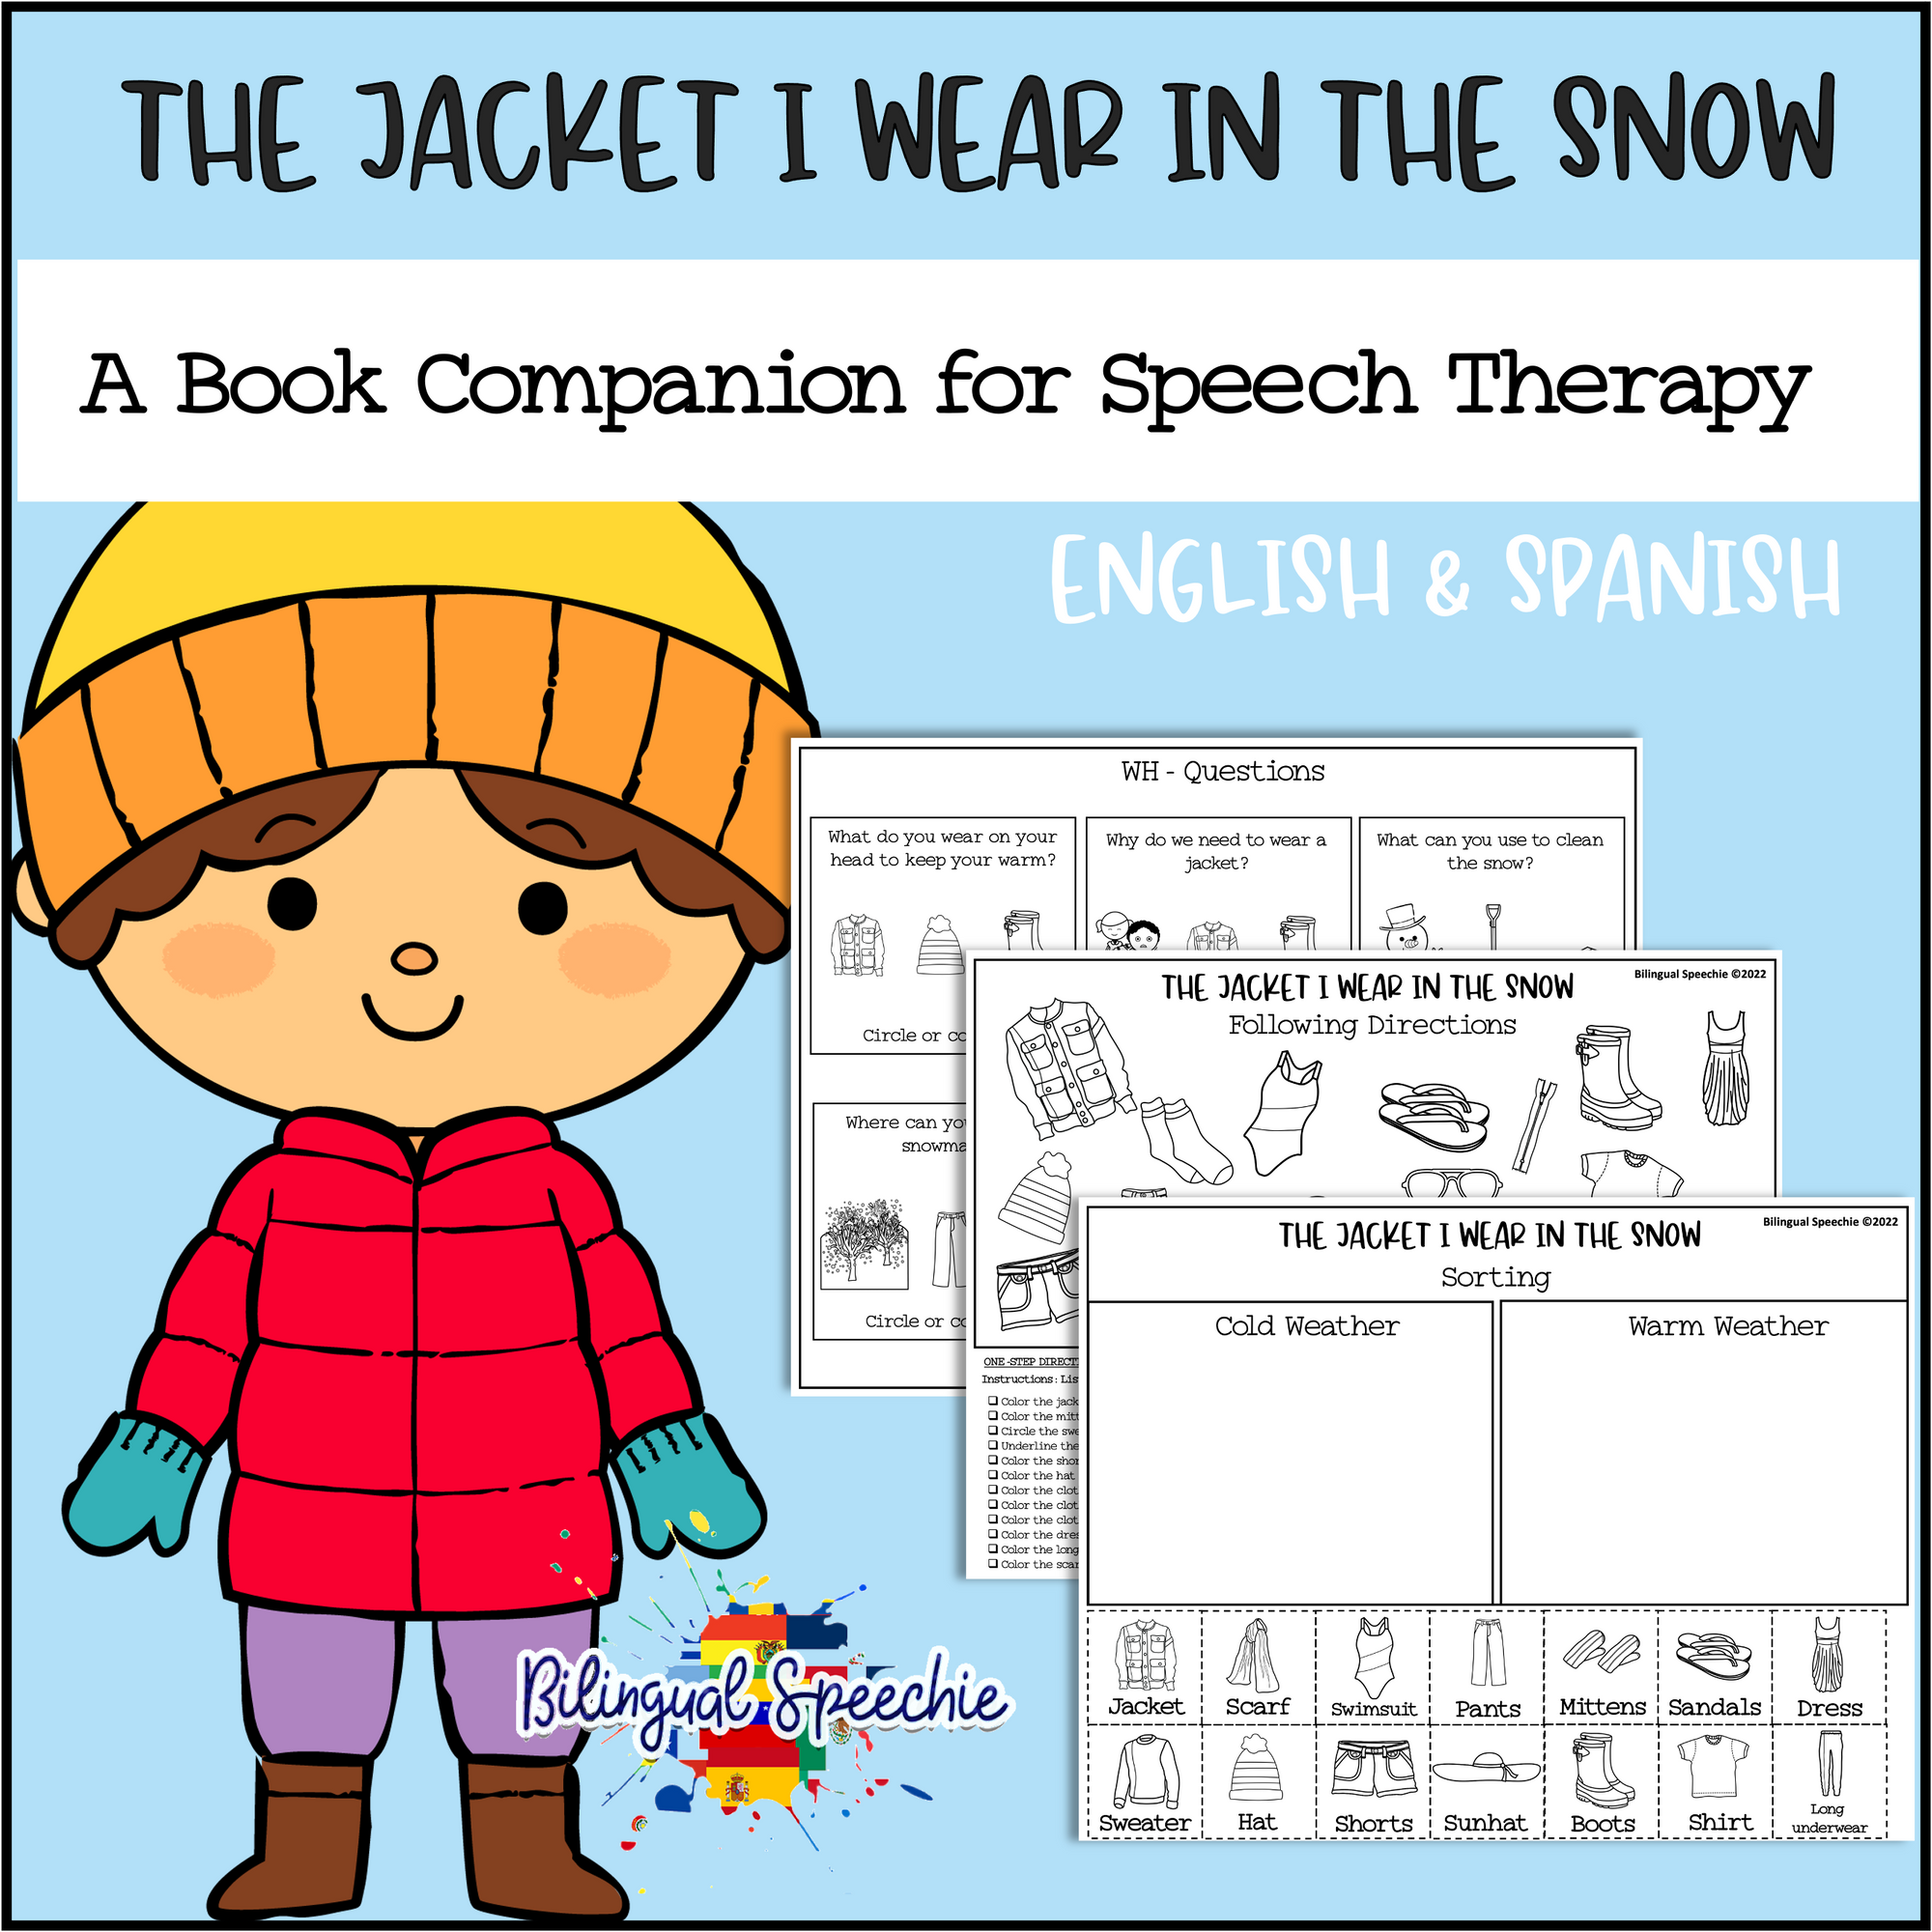 The Jacket I Wear in the Snow | Bilingual Book Companion